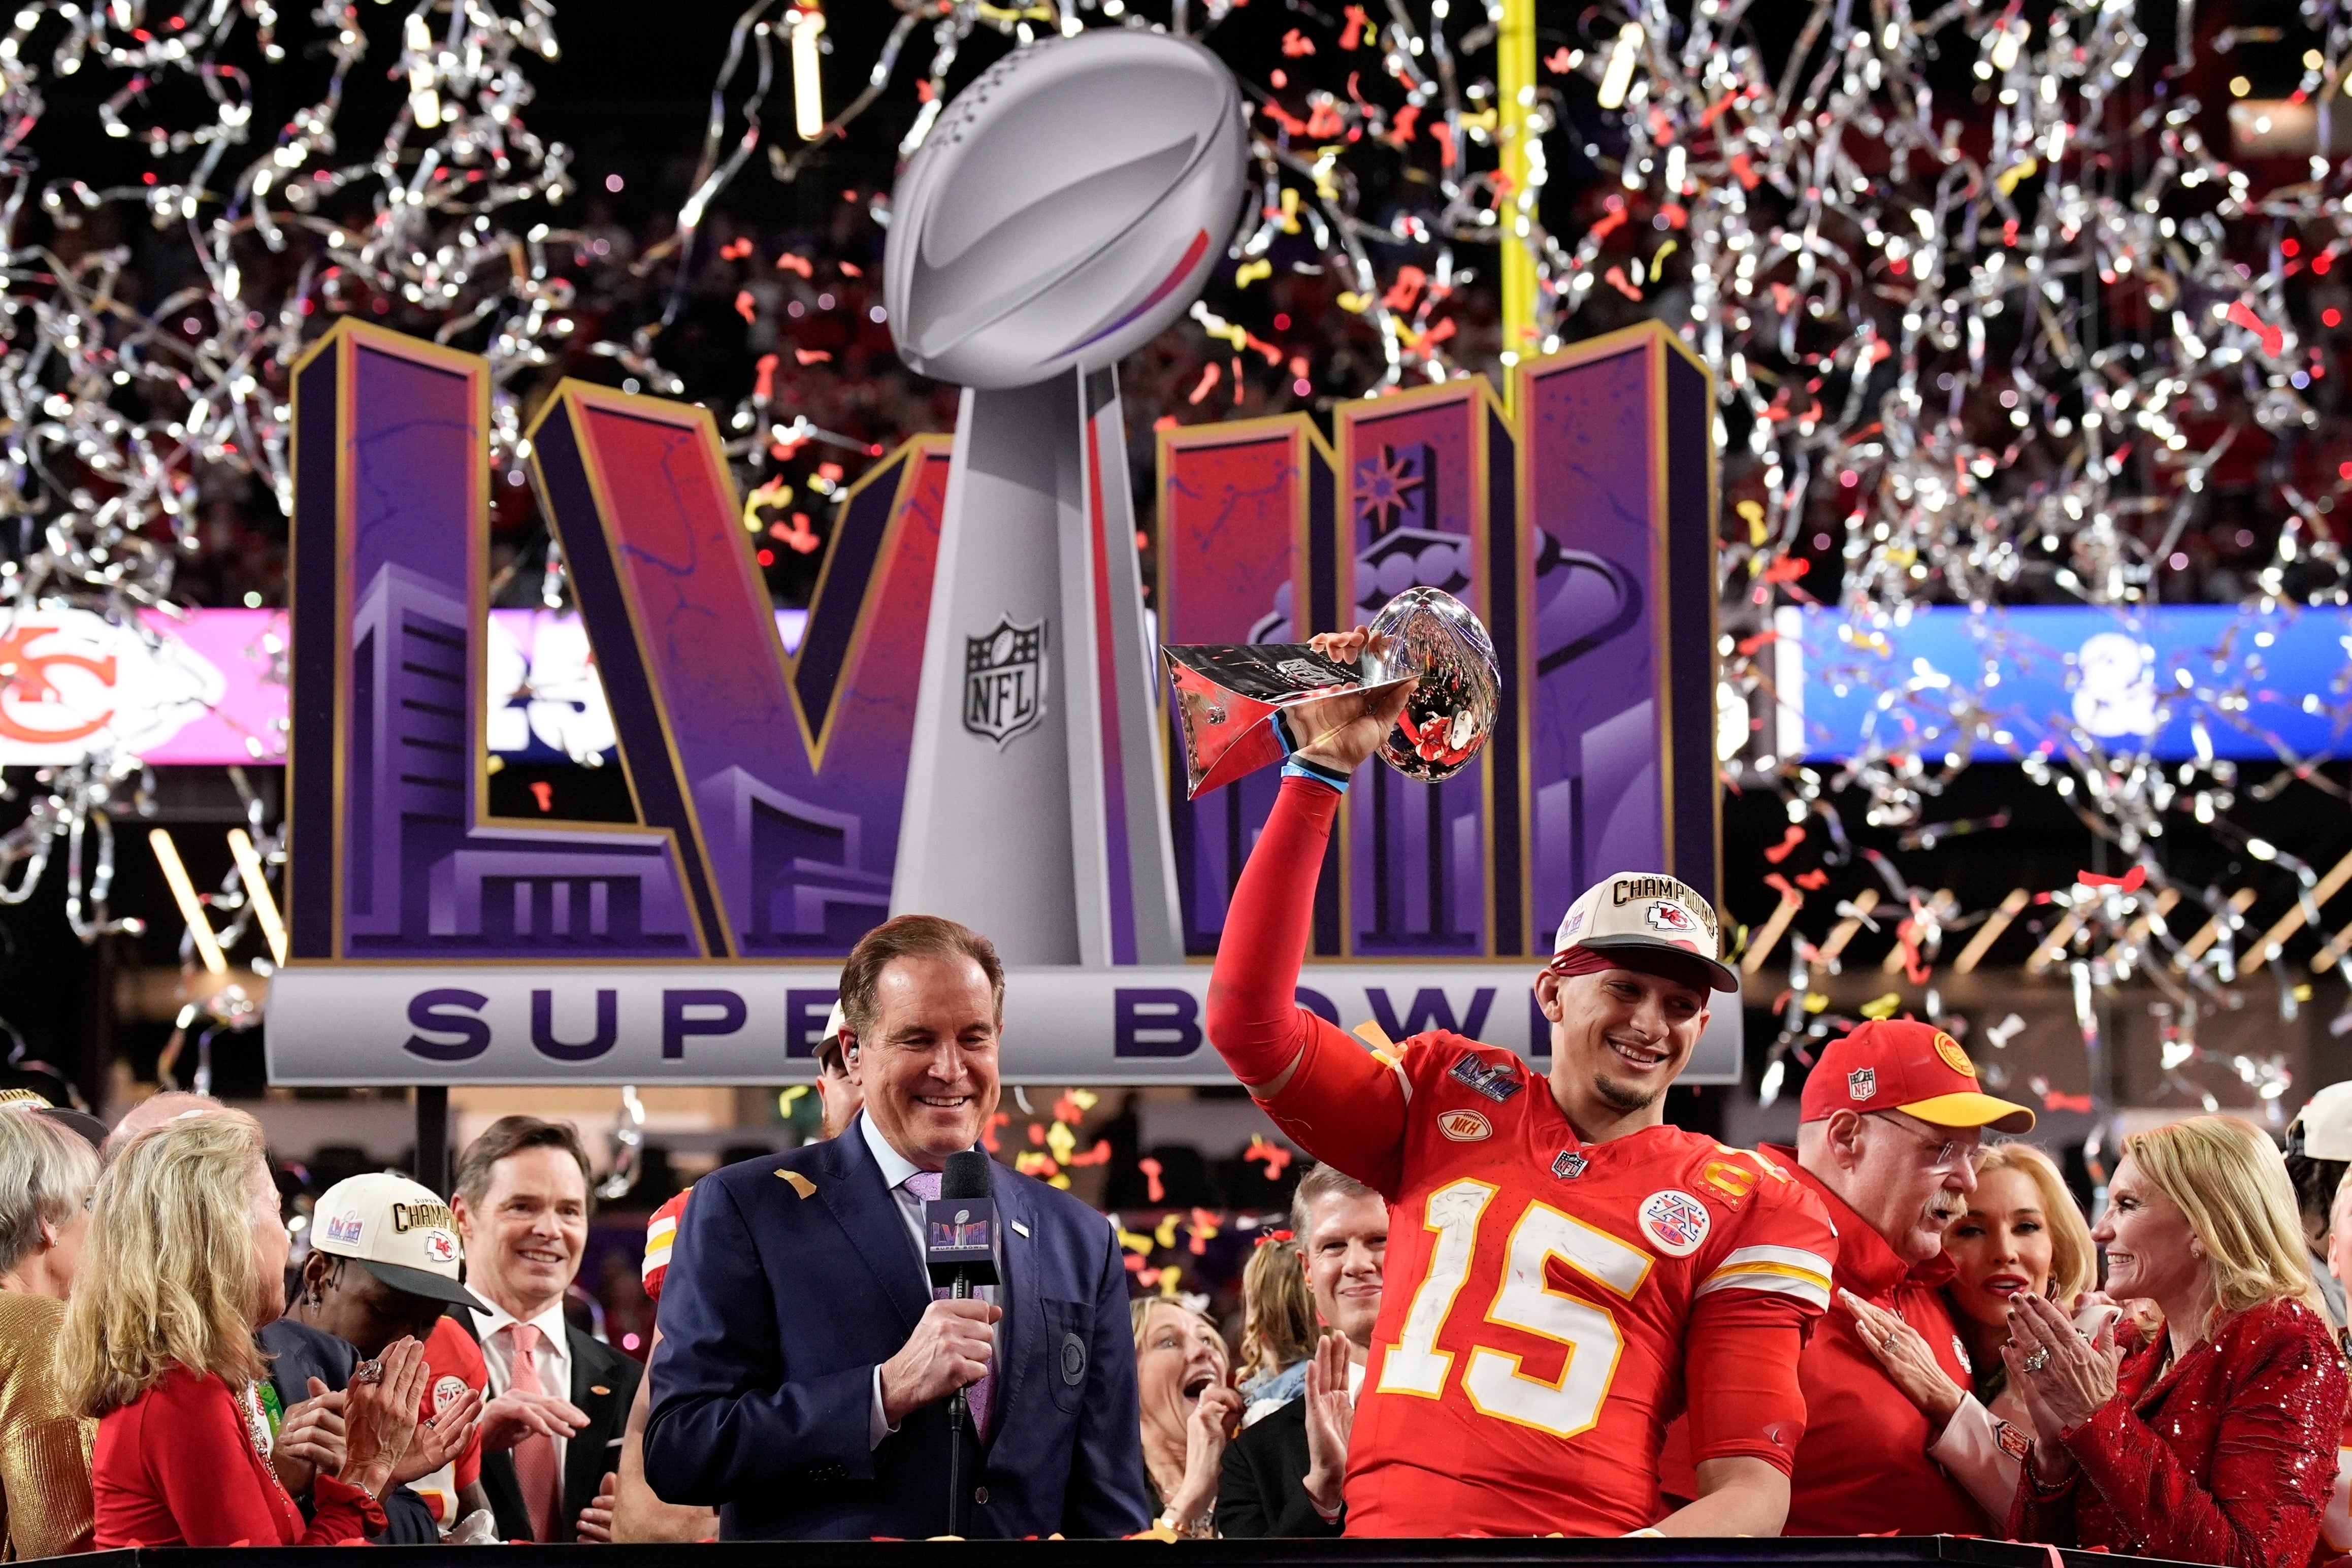 Patrick Mahomes has steered the Chiefs to back-to-back Super Bowl victories